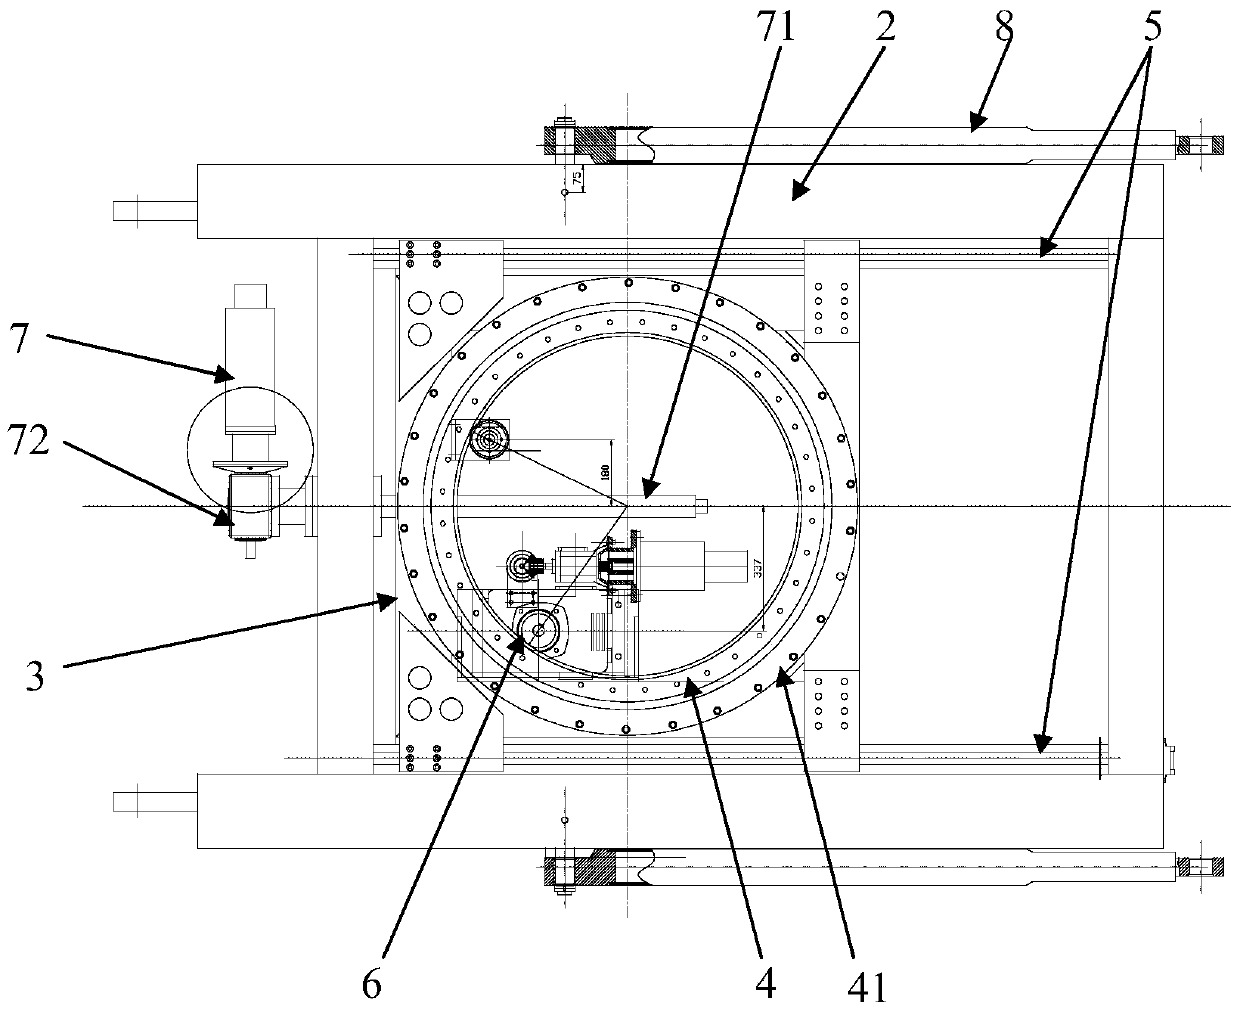 Rotary table device that can be raised and lowered in a large range